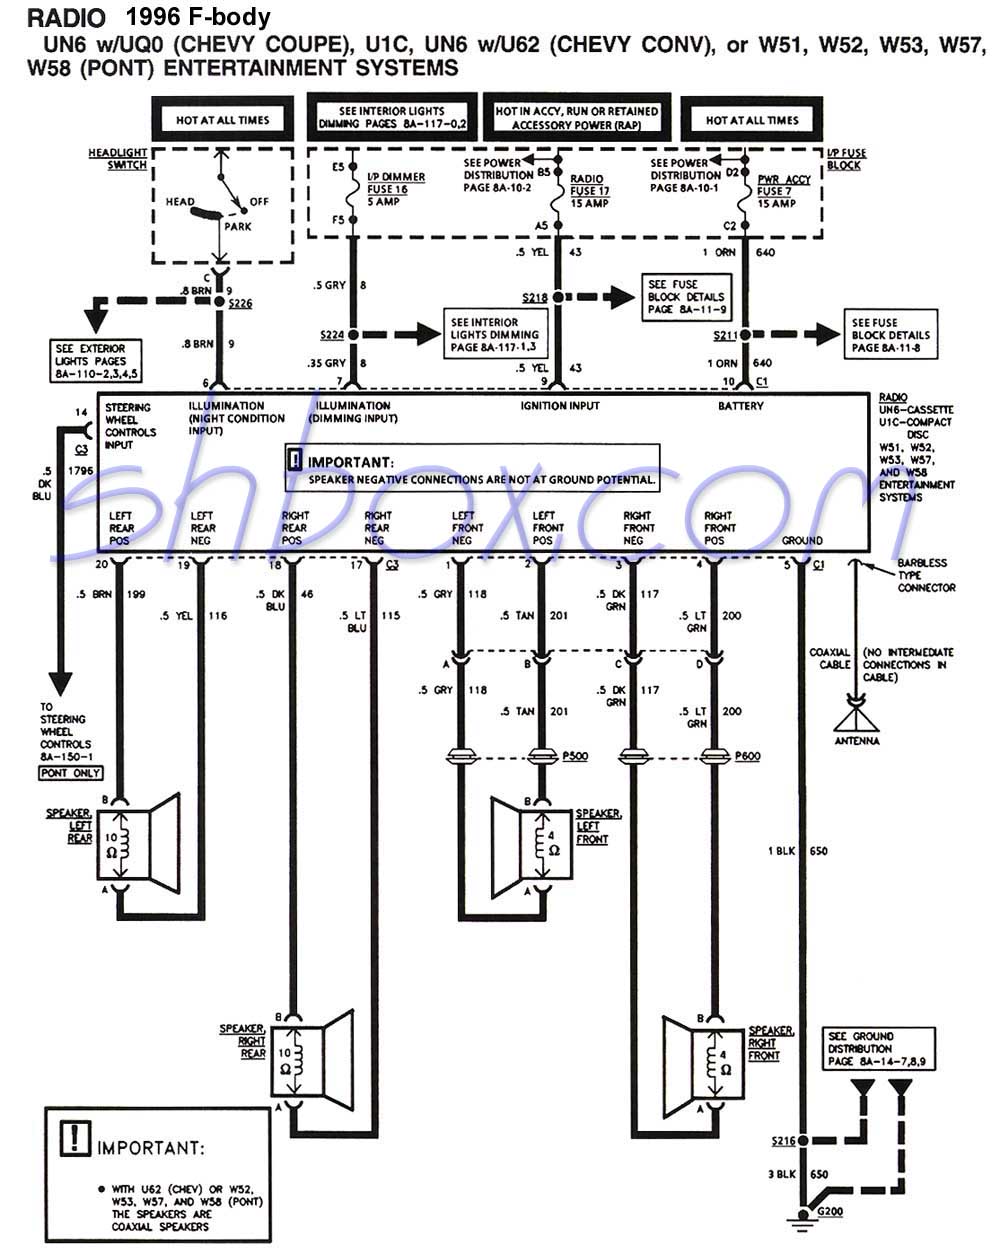 Factory Subwoofer Wiring Diagram 2013 Camaro from shbox.com